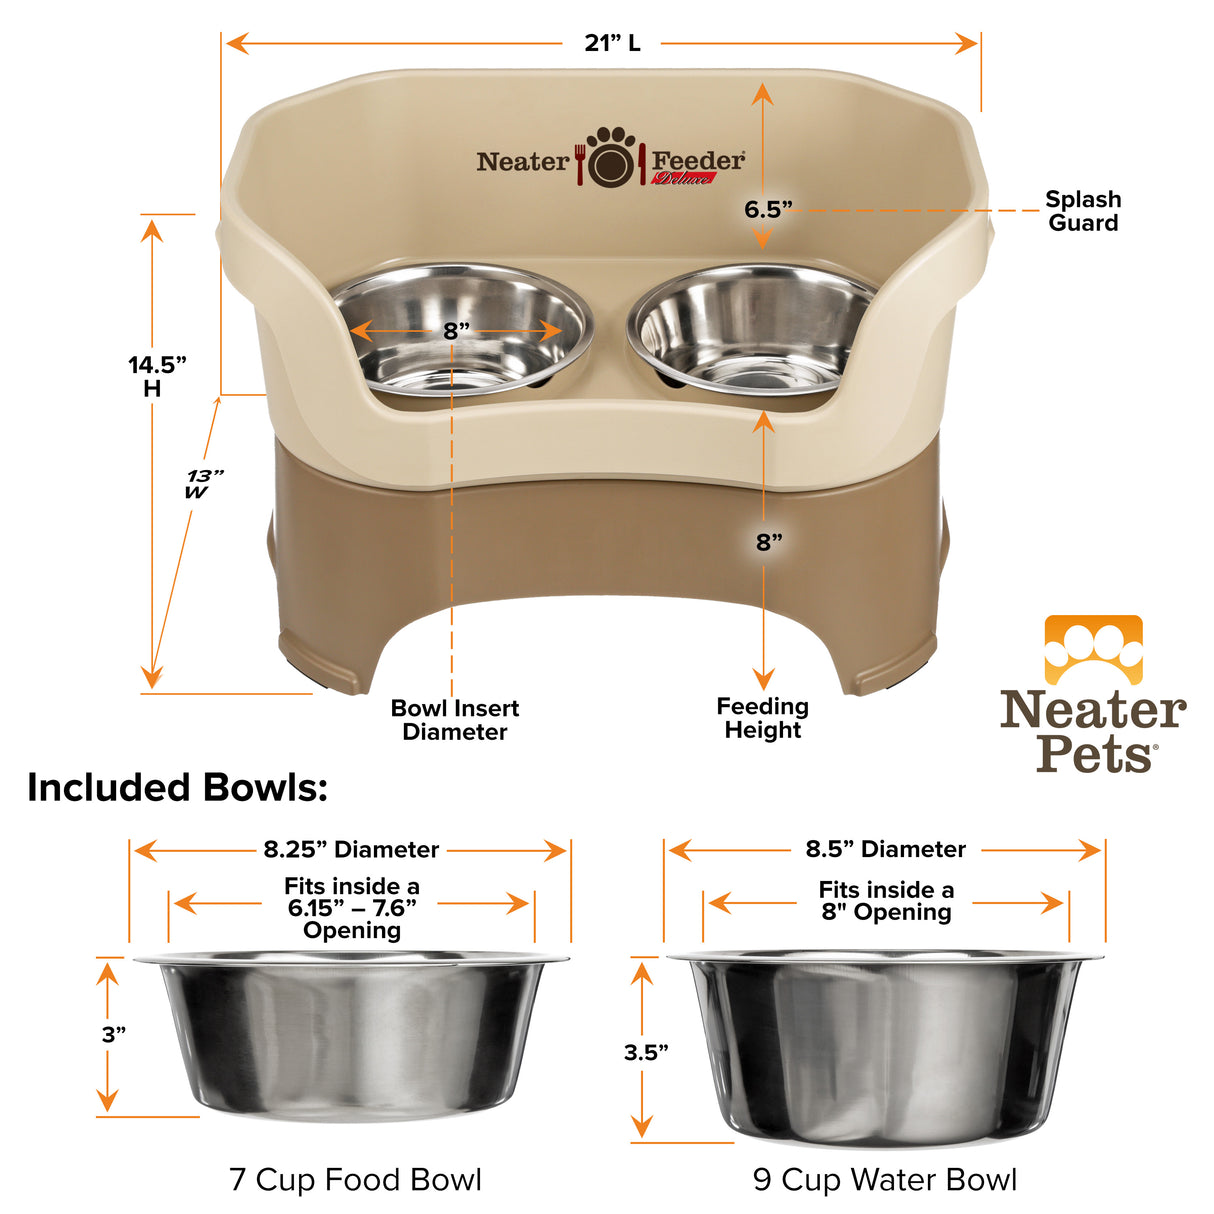 Deluxe Cappuccino Large Dog Neater Feeder and Bowl dimensions